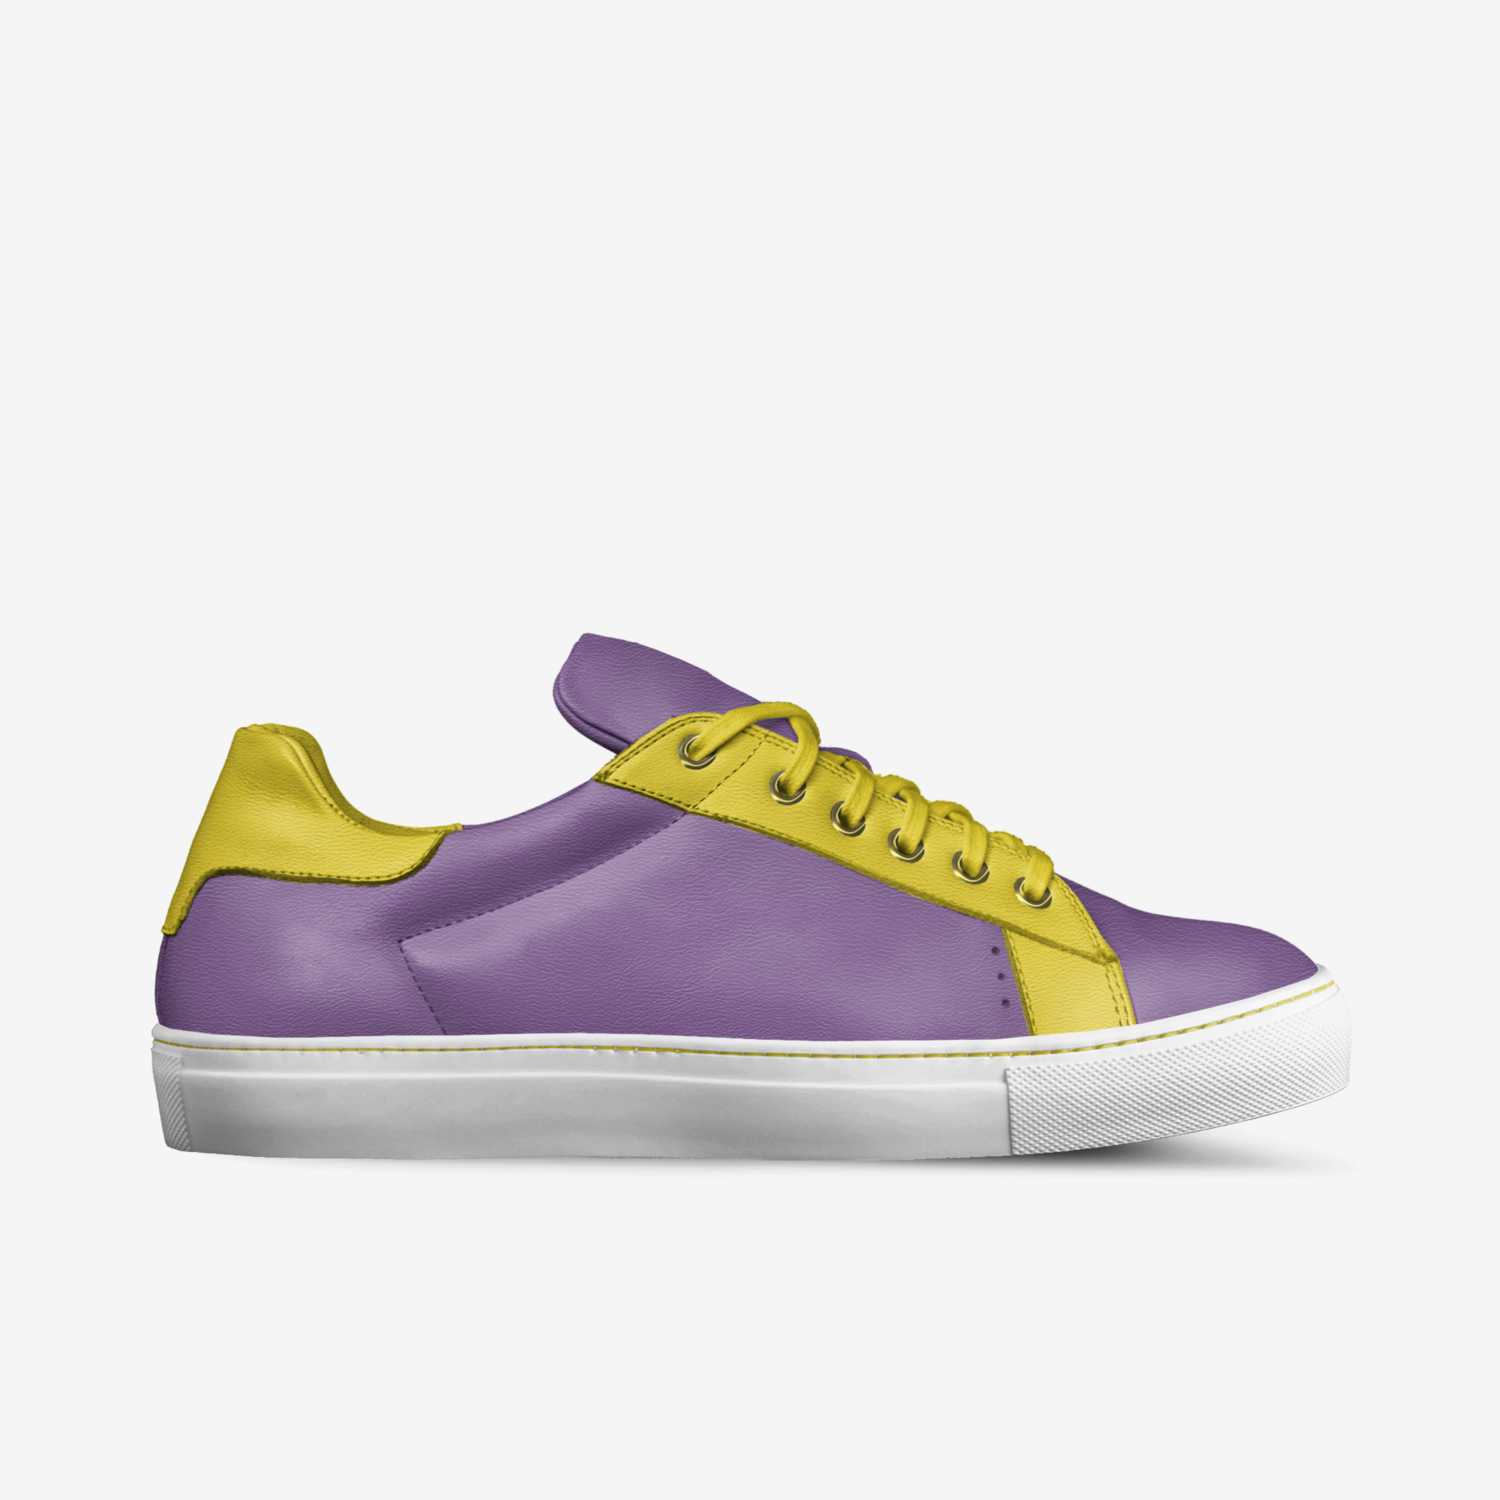 Bruhz custom made in Italy shoes by K Parker | Side view